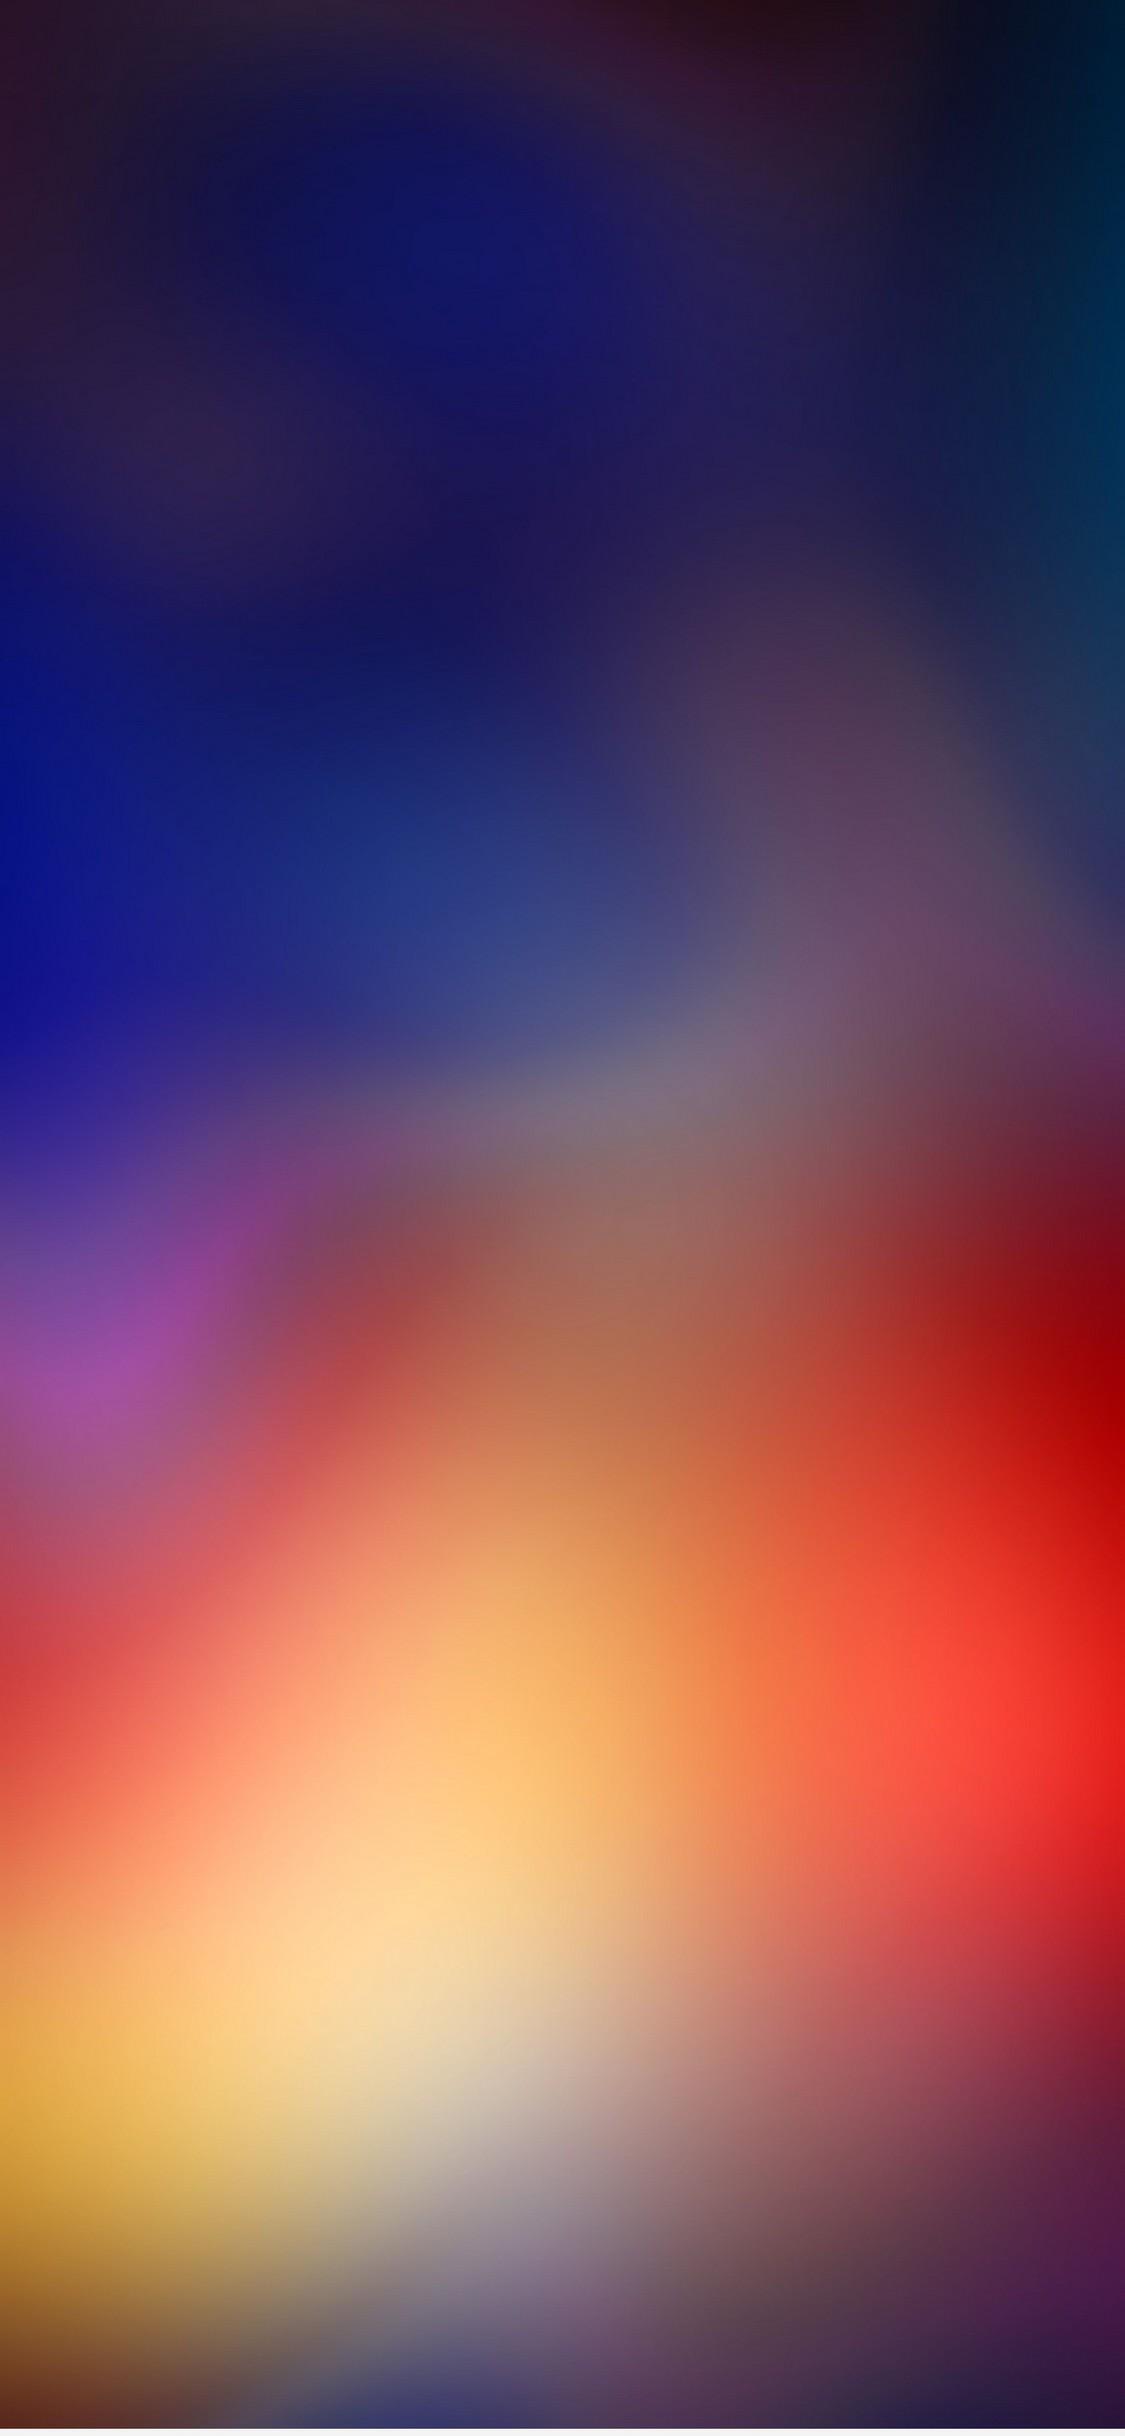 iPhone X Home Screen Wallpapers - Wallpaper Cave